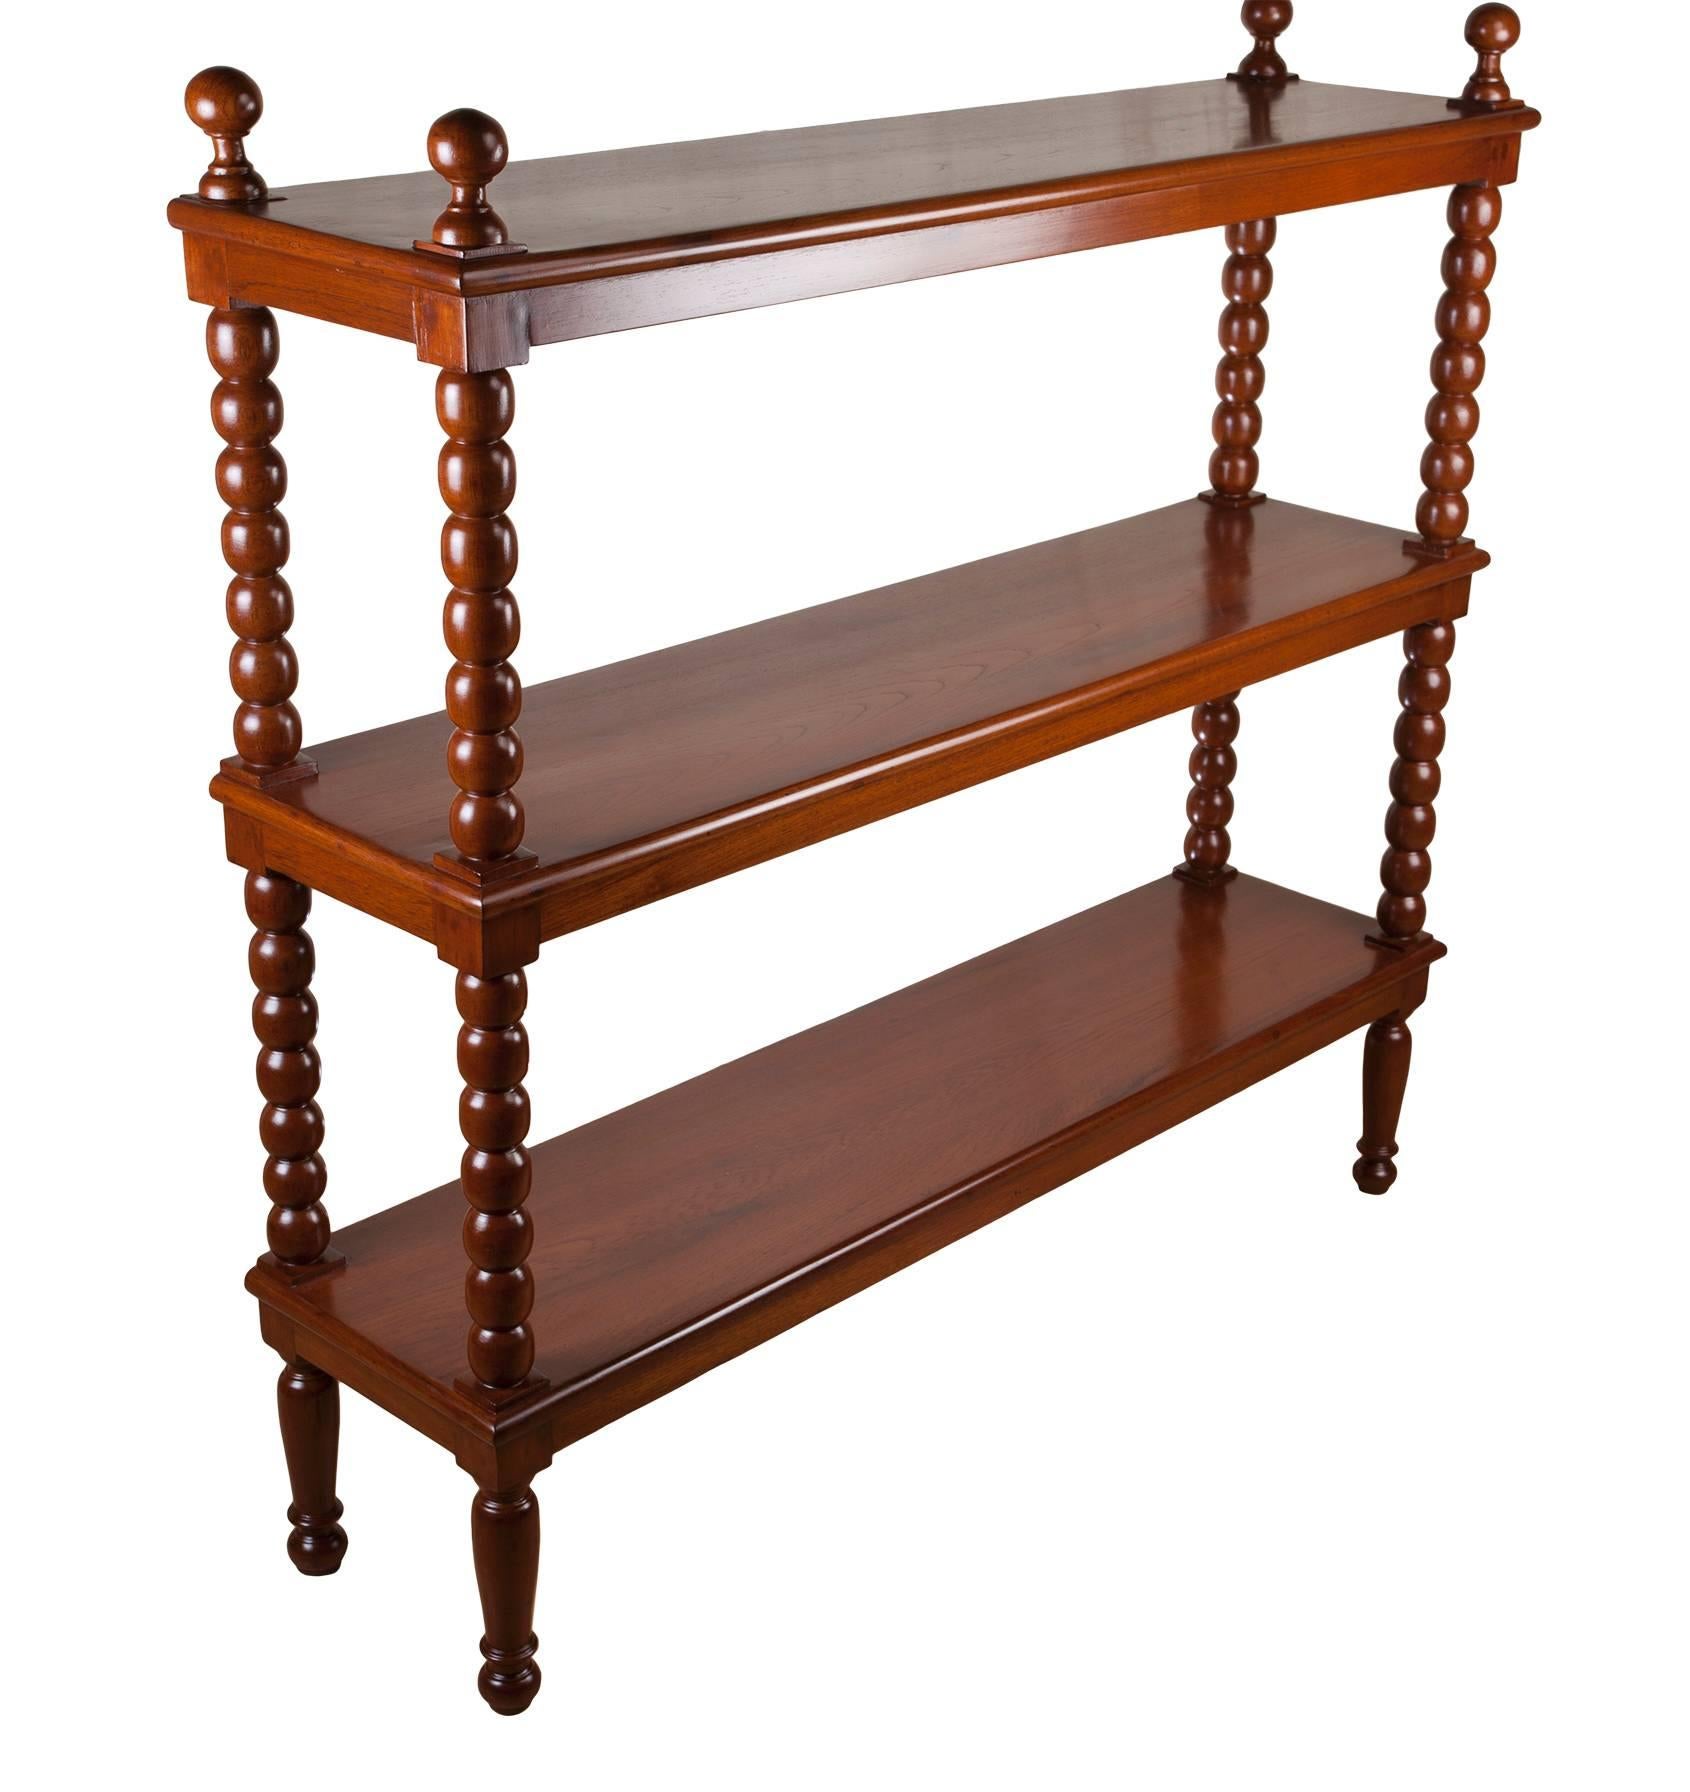 Handsome, Early 1900s mahogany étagère or bookcase with bobbin column supports with a tapered reeded leg with bead and ball foot; open shelving. Refinished. Distance between shelves is 15 inches. Colonial British. Height of 47